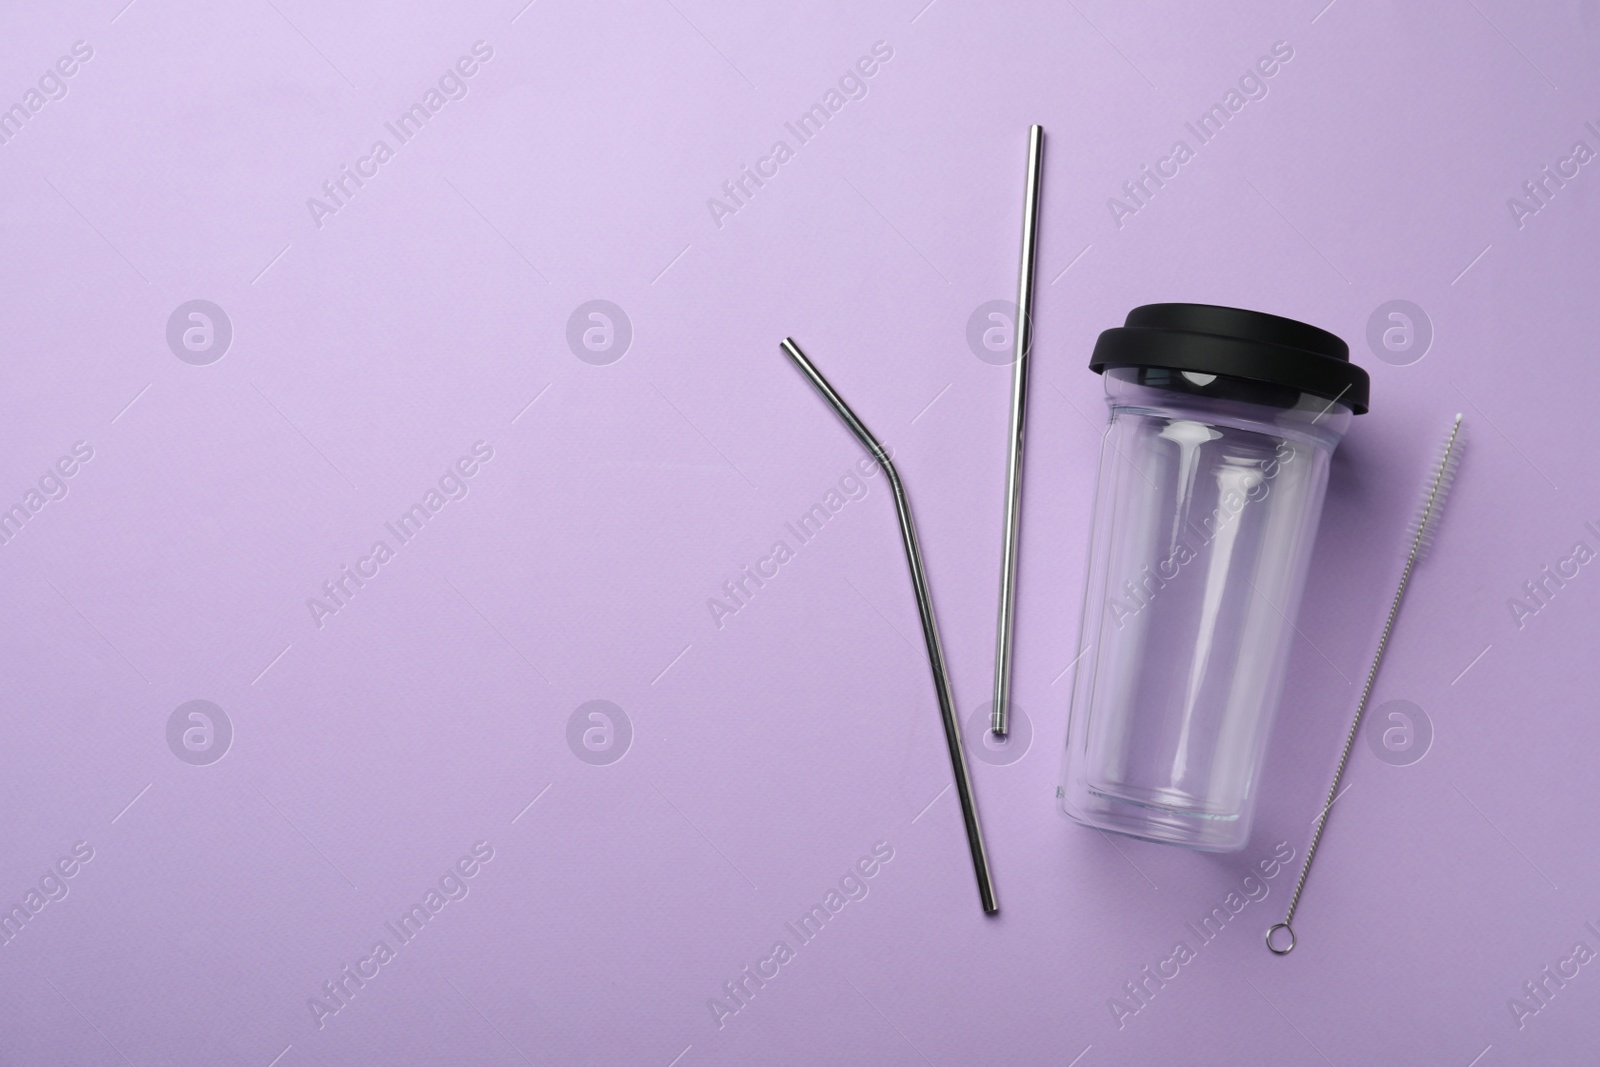 Photo of Glass cup, metal straws and brush on violet background, flat lay with space for text. Conscious consumption